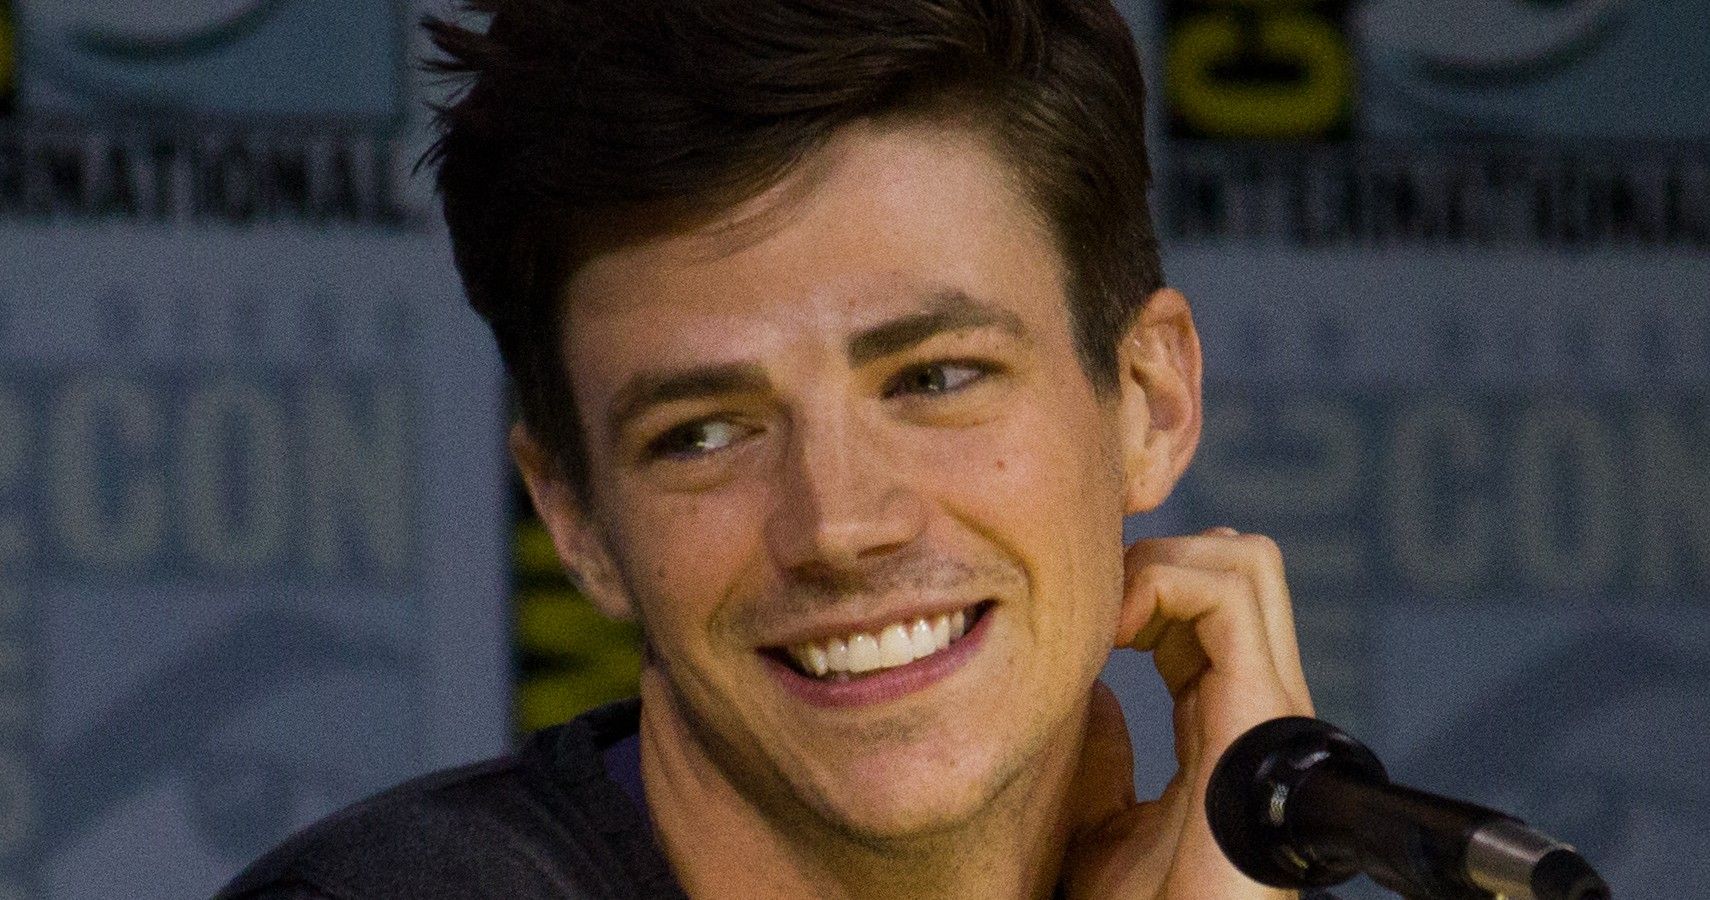 'The Flash' Star Grant Gustin & Wife LA Thoma Welcome Baby Girl